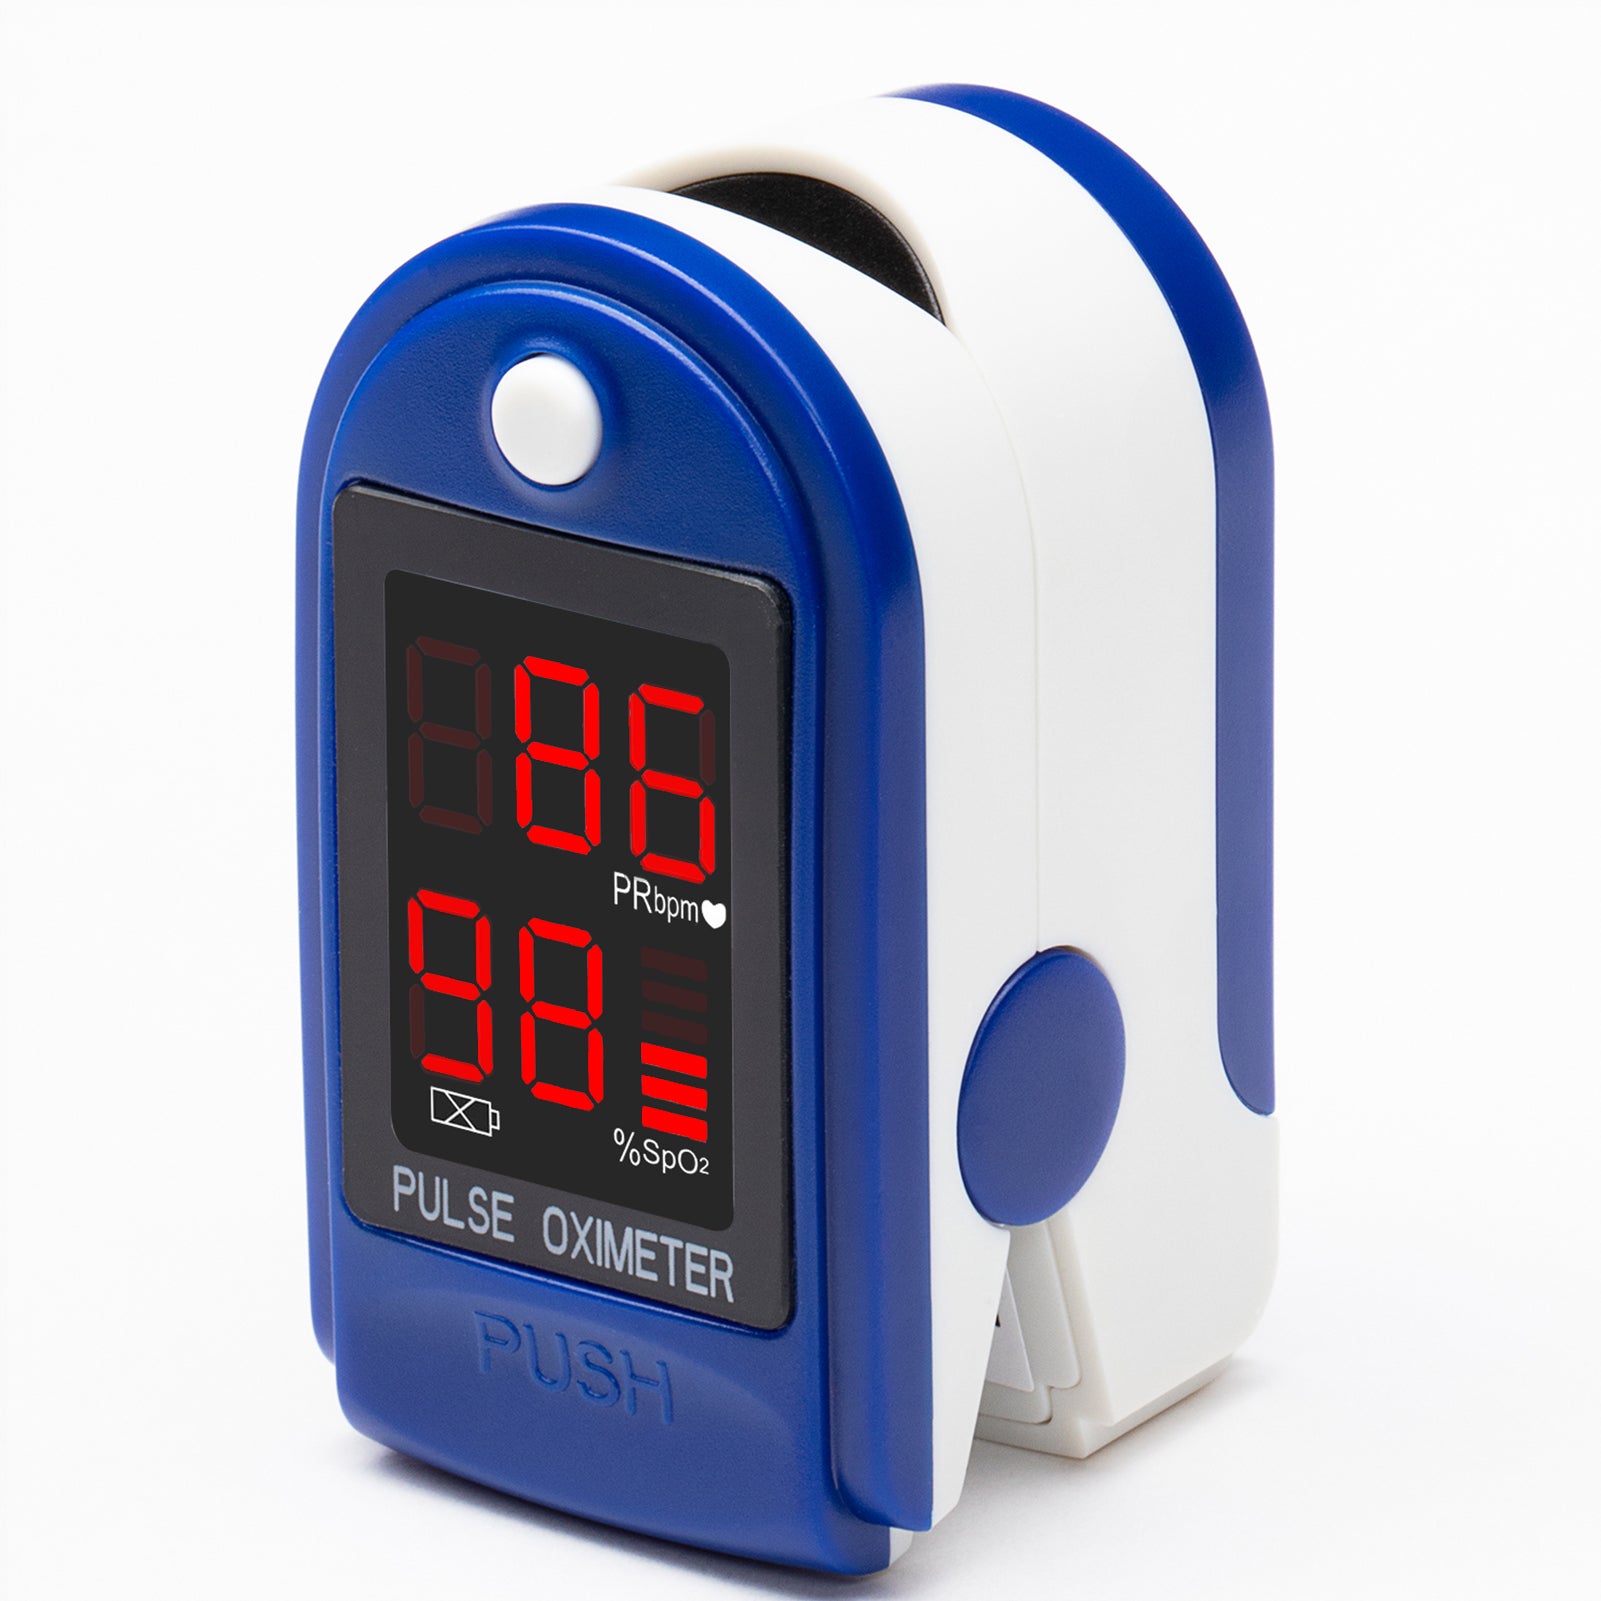 Finger Pulse Oximeter Clinical Guard 50DL Image 1 - Appearance